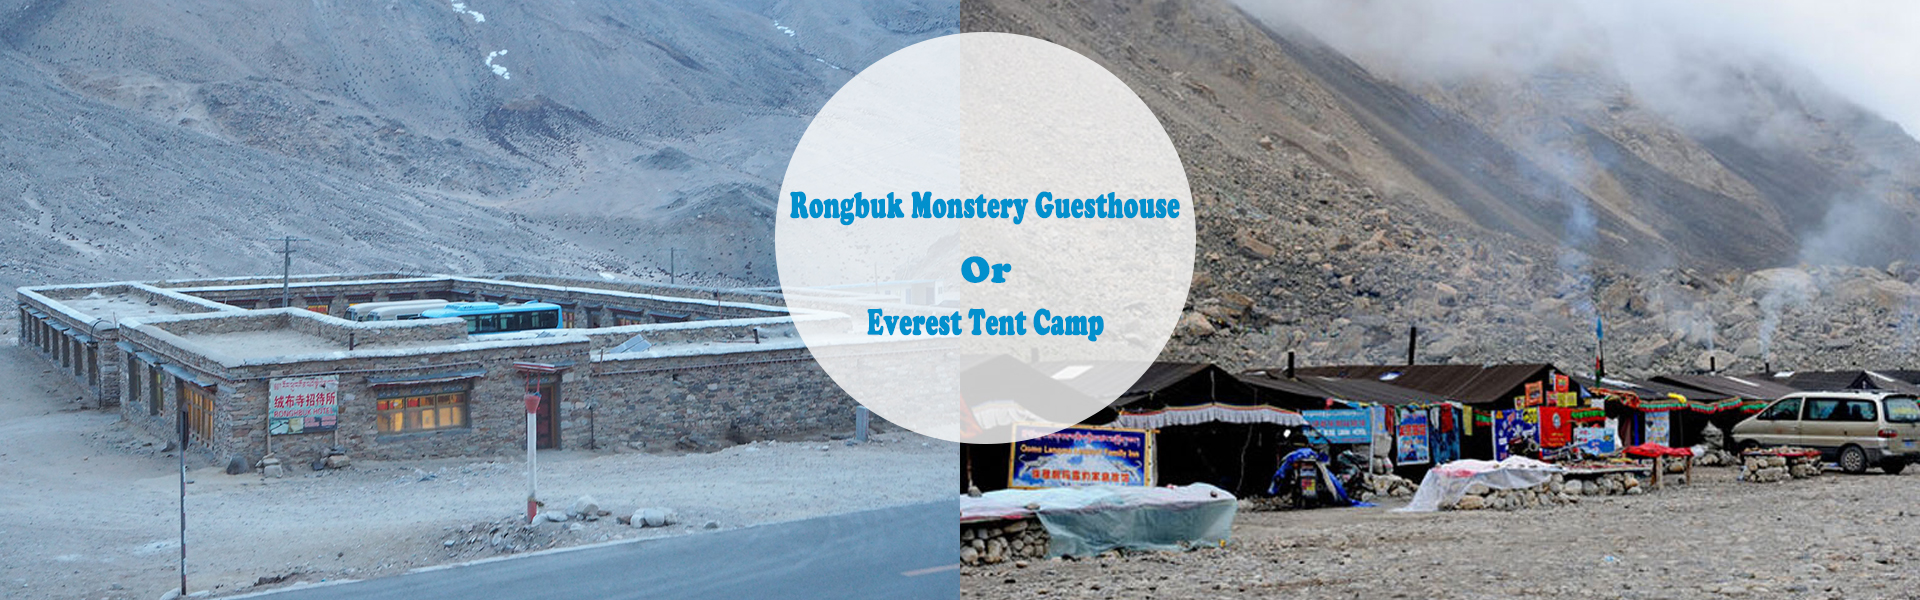 Rongbuk Monastery Guesthouse or Everest Tent Camp